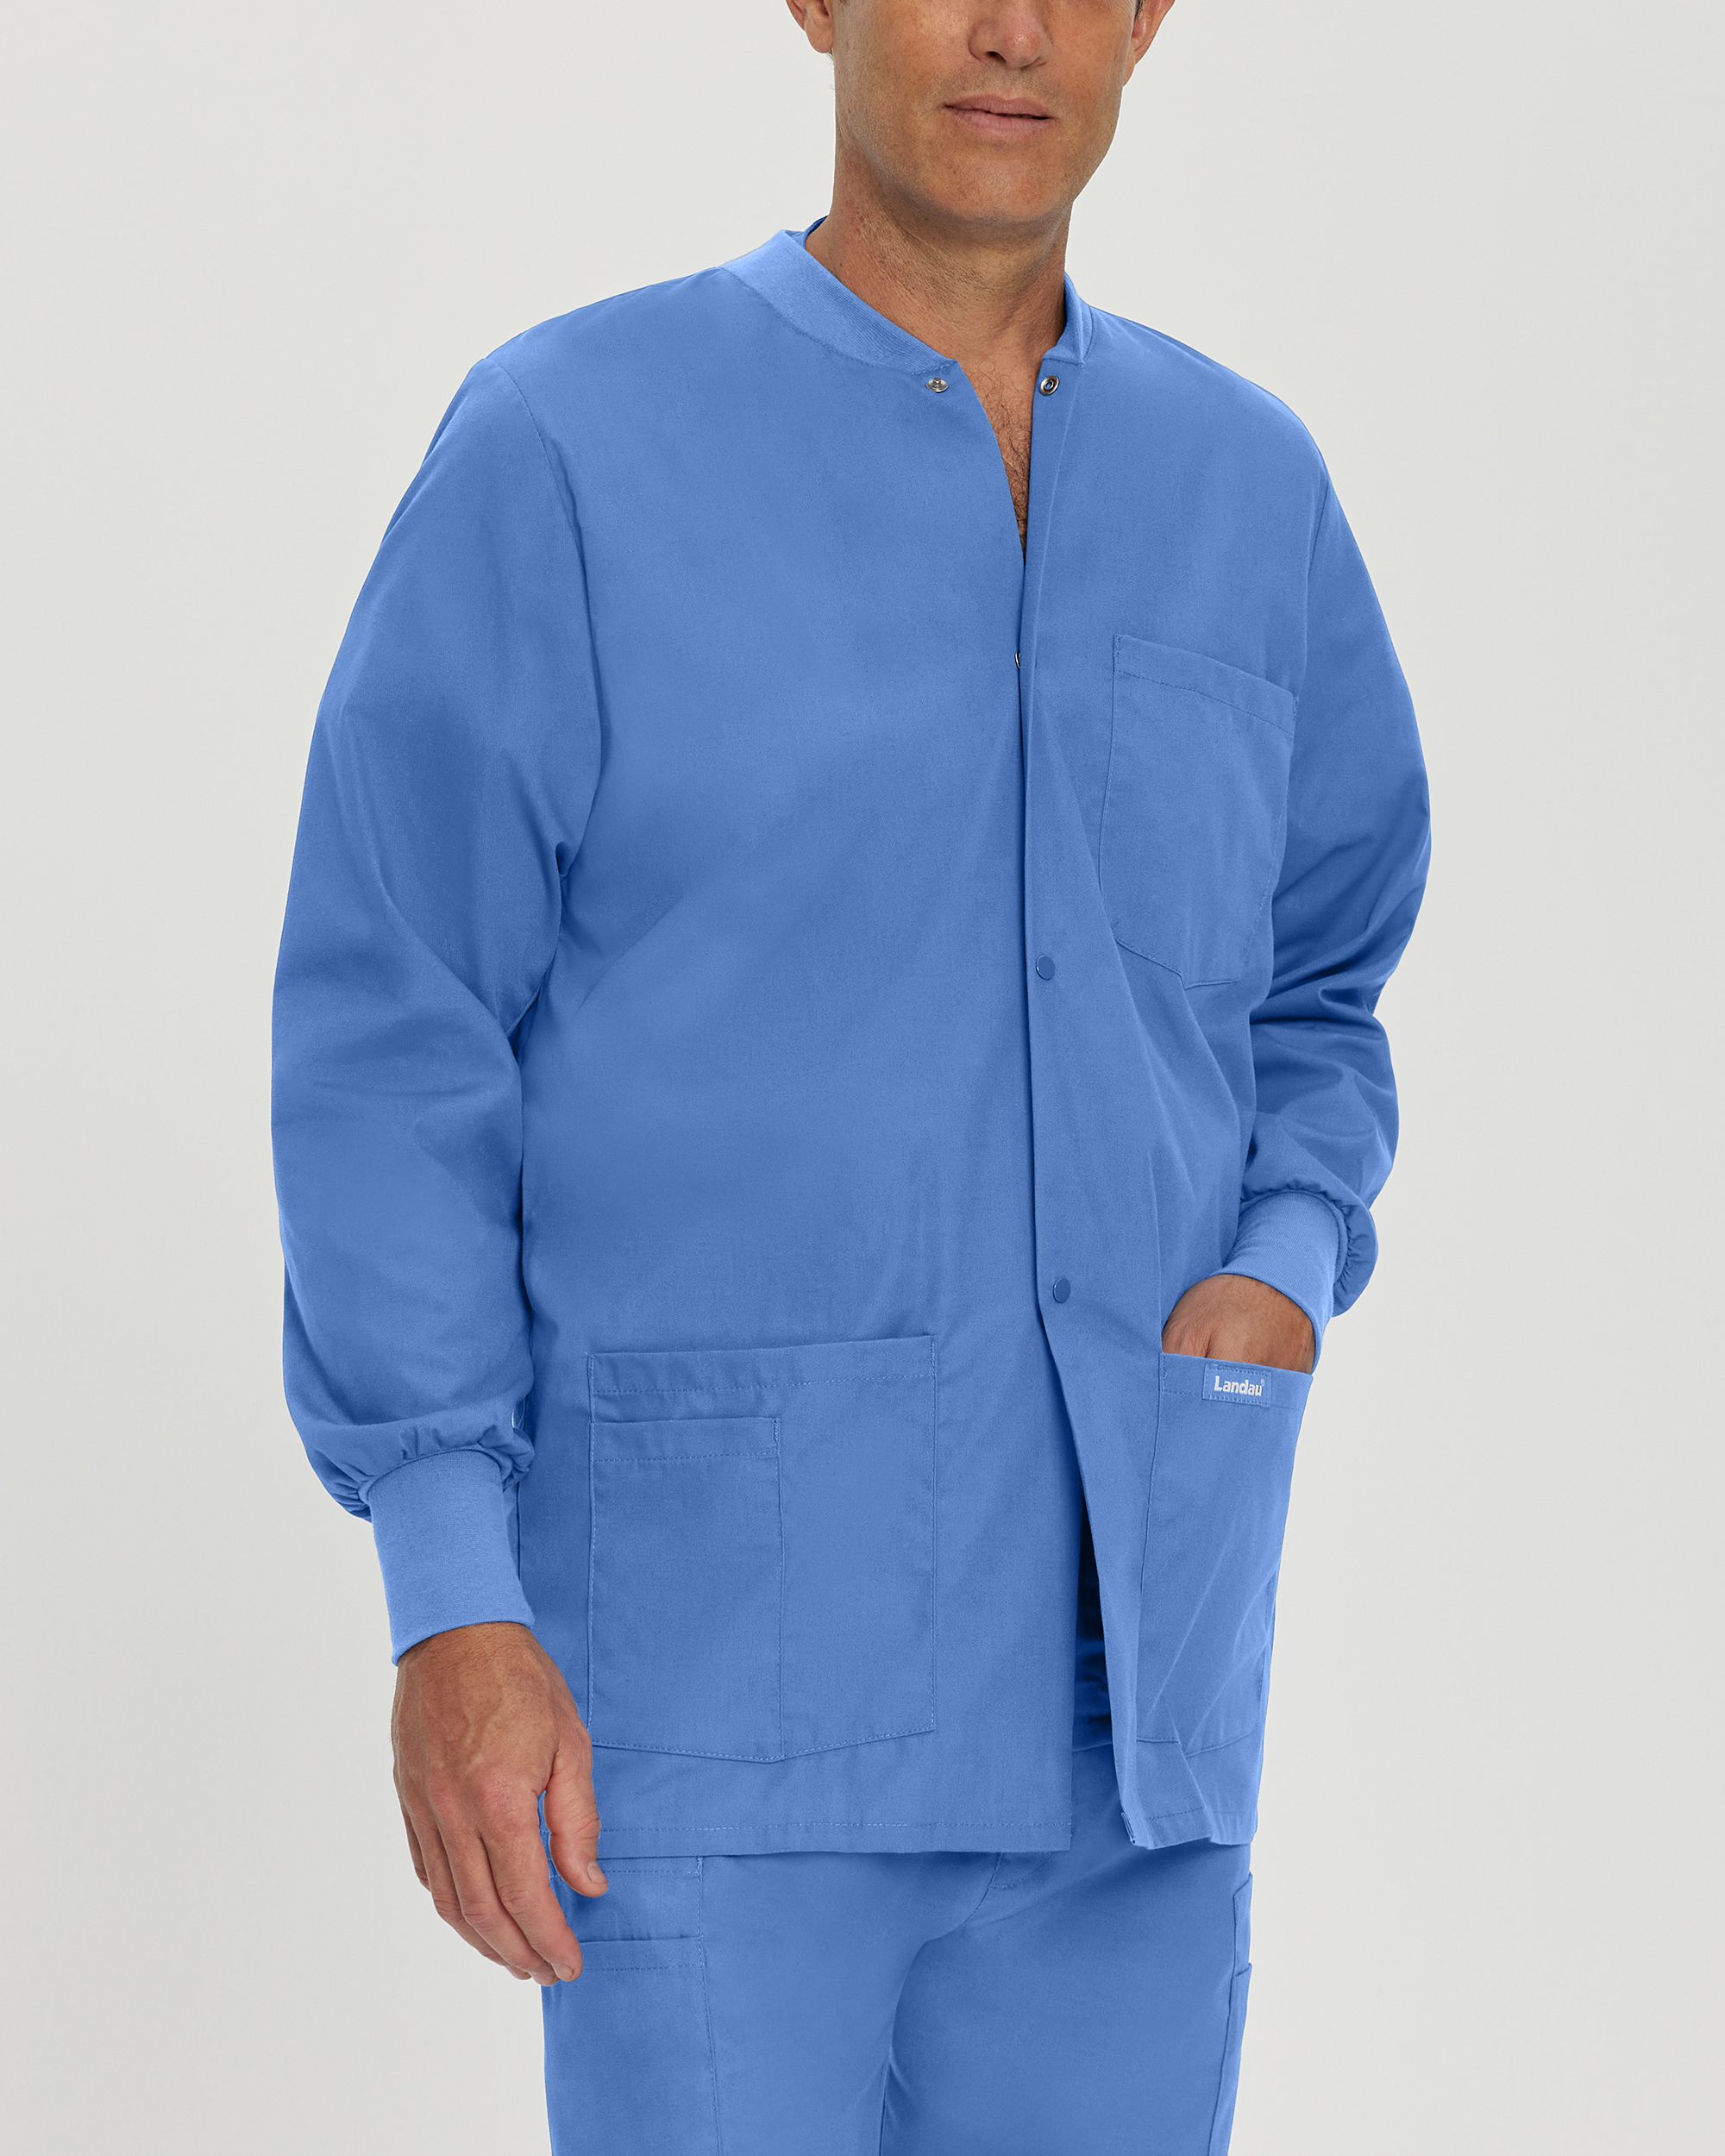 Landau Essentials Scrub Jackets for Men - Classic Relaxed Fit, Crew Neck, Snap Front, 5 Pocket, Warm-up Scrubs 7551 Questions & Answers